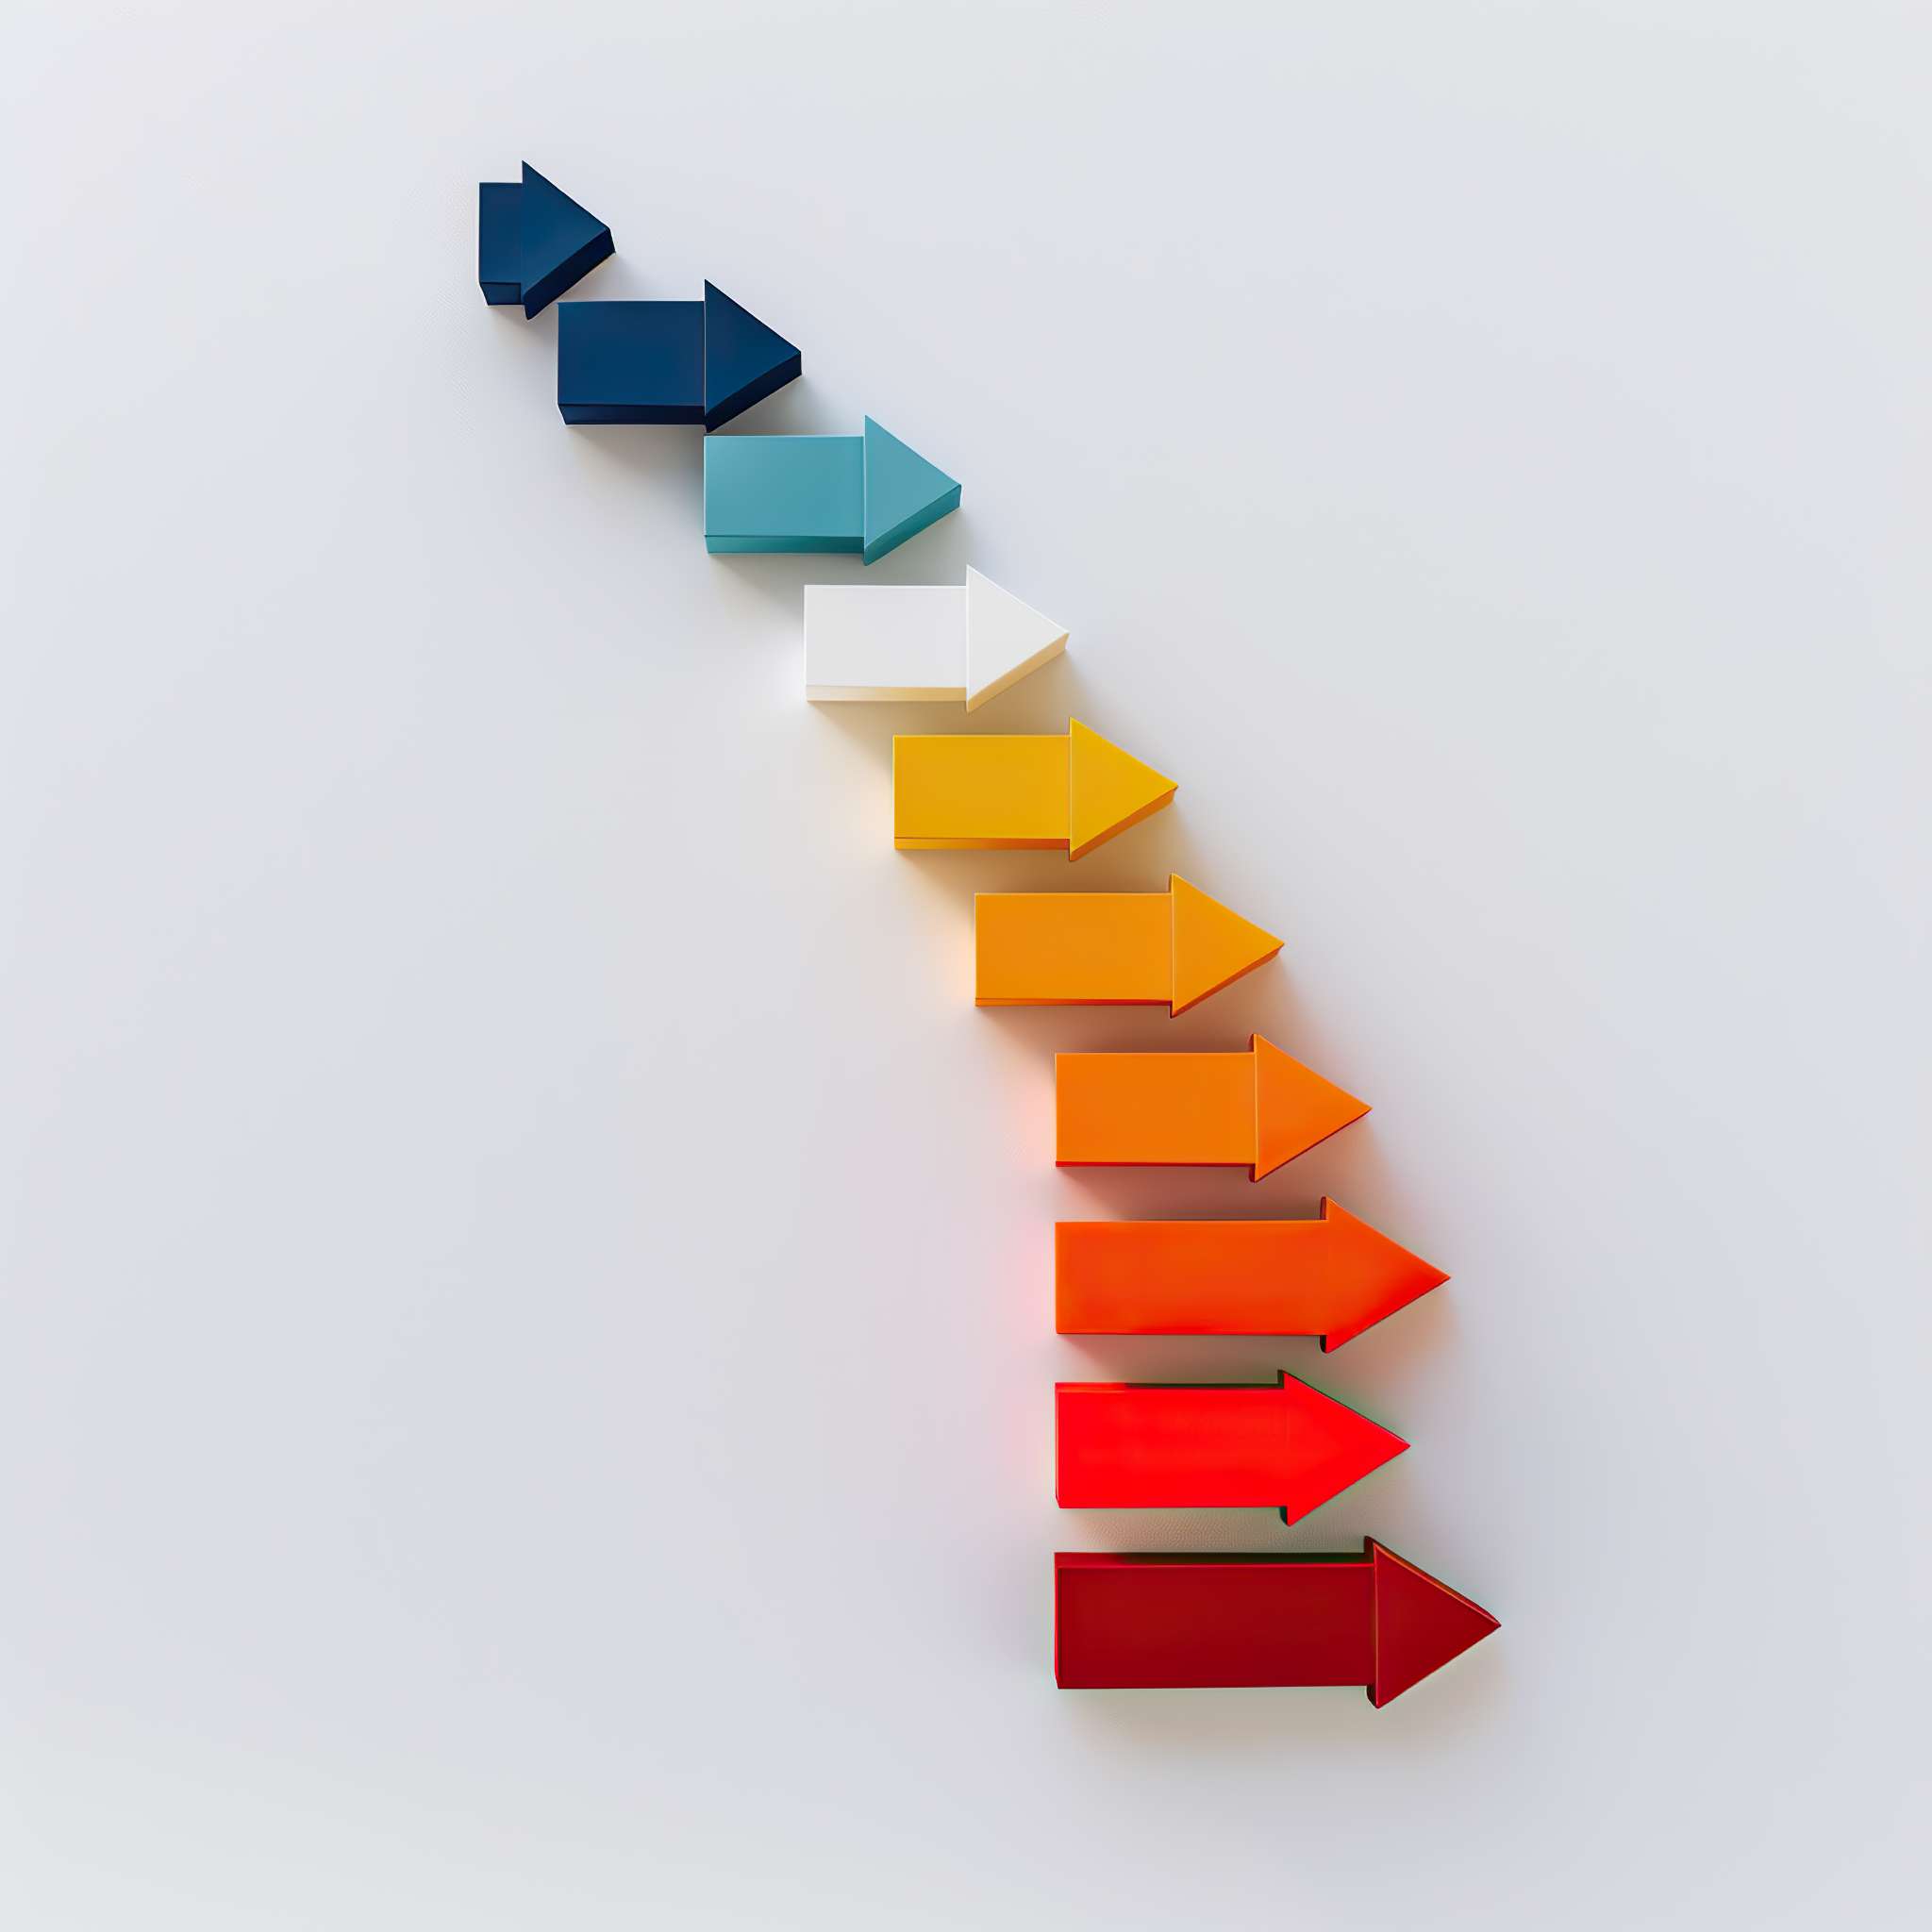 Multi colored 3d arrows on light background